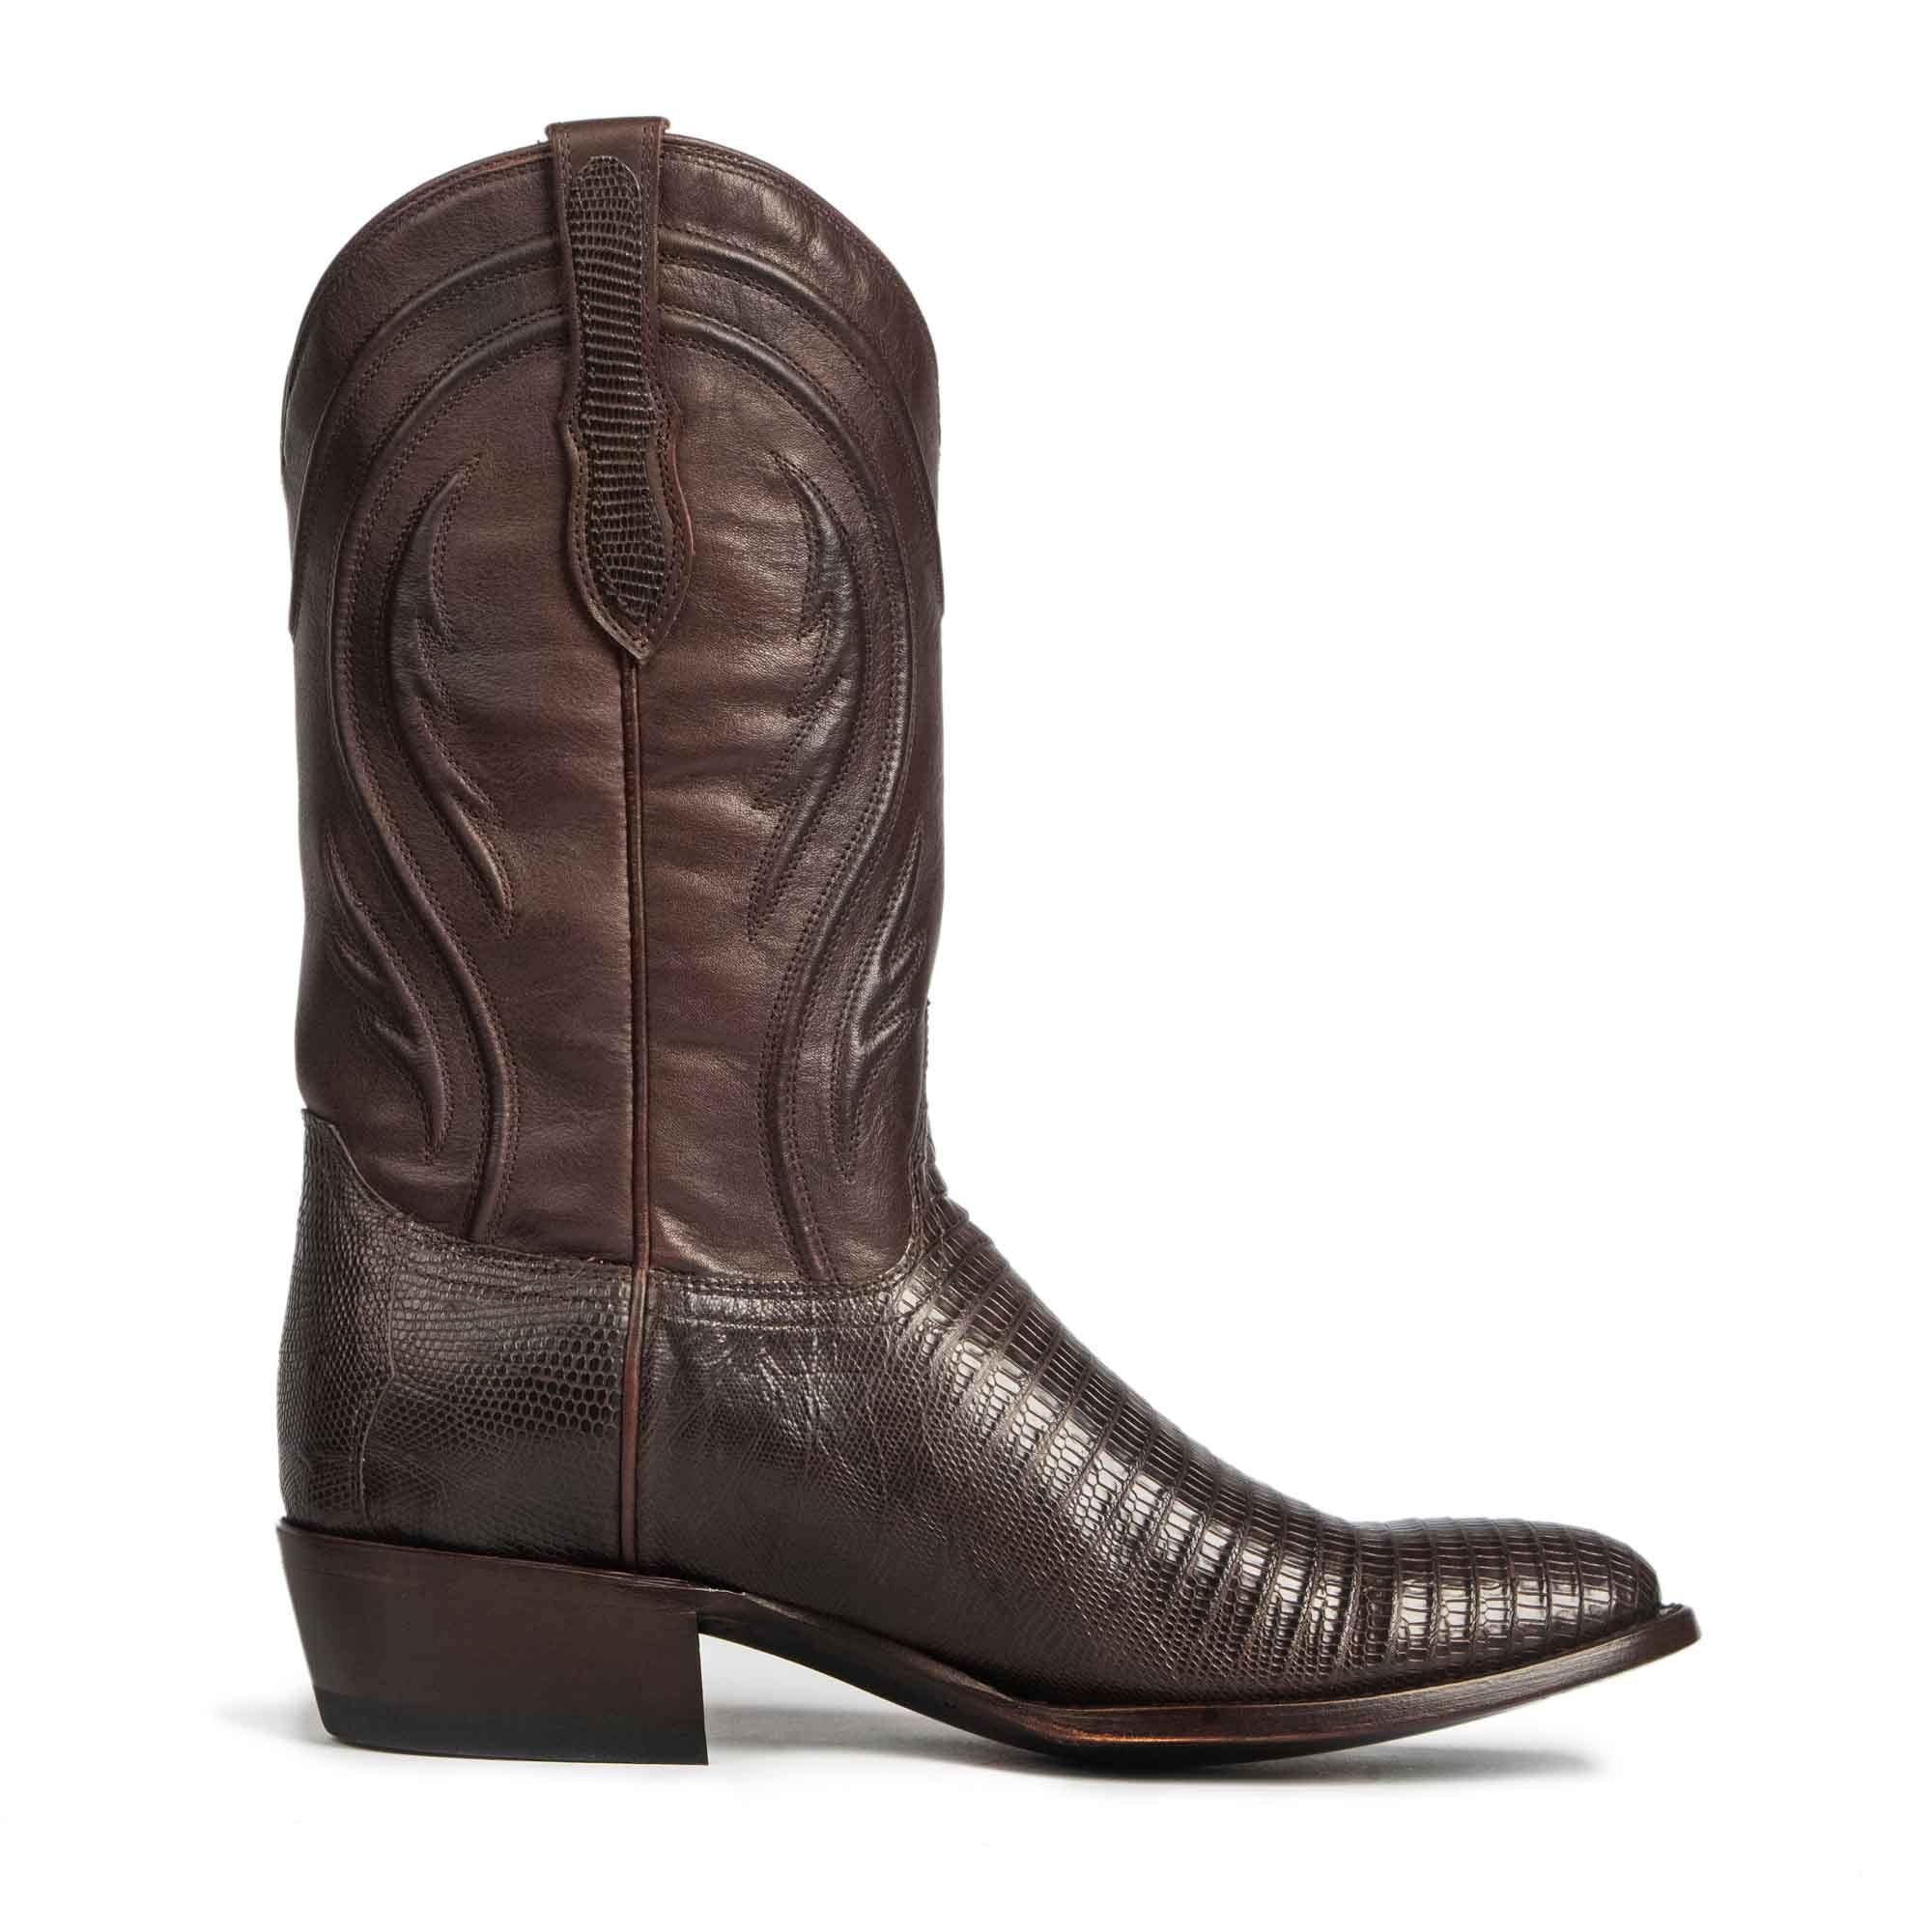 Men's Teju Lizard Leather Boots | The Marcus | Western R-Toe | Rujo Boots